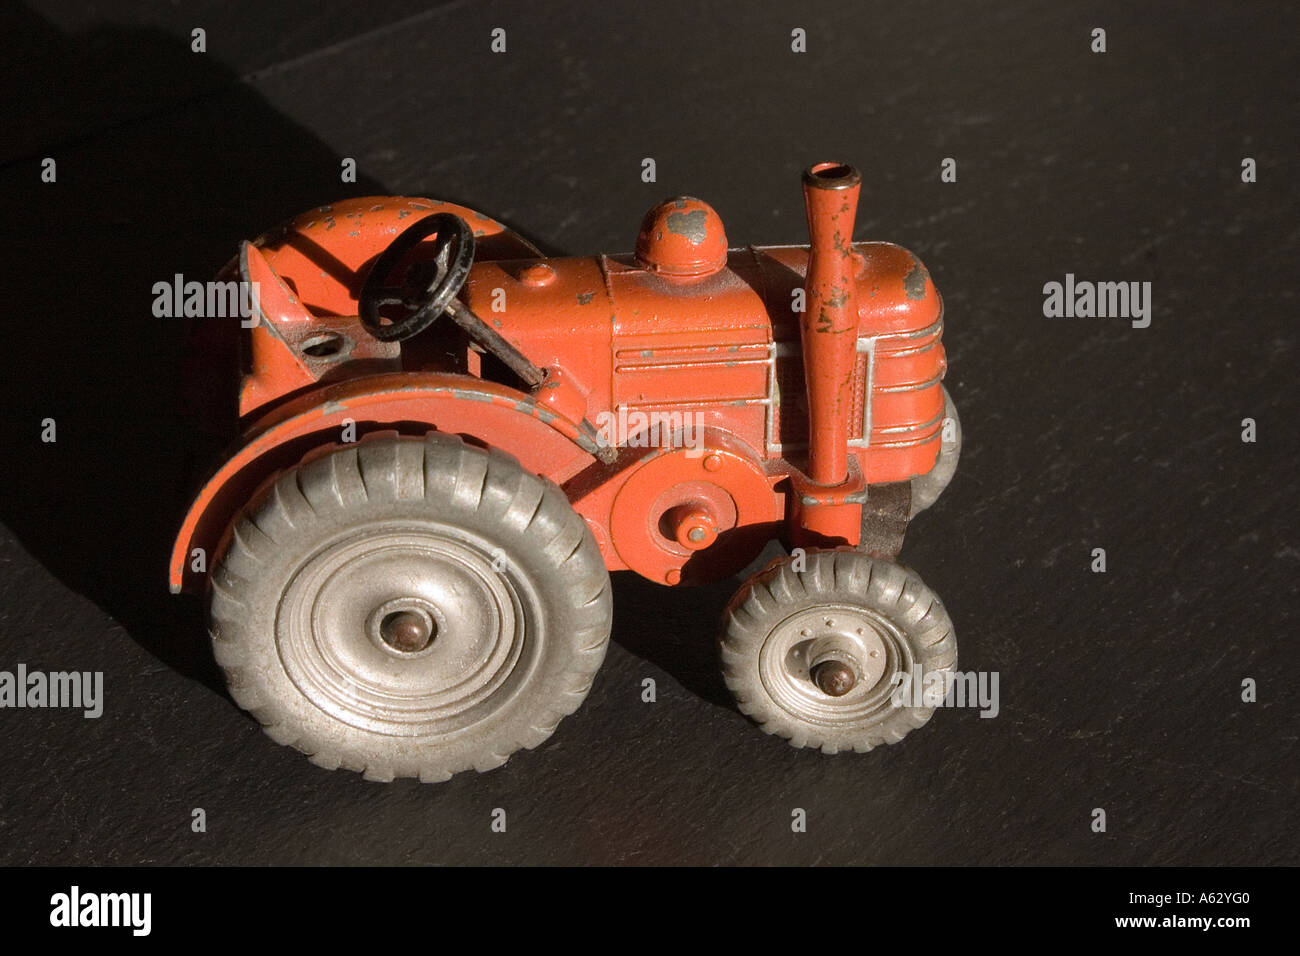 British Dinky Toys Massey Harris tractor No 301 from the mid-1950s Stock Photo